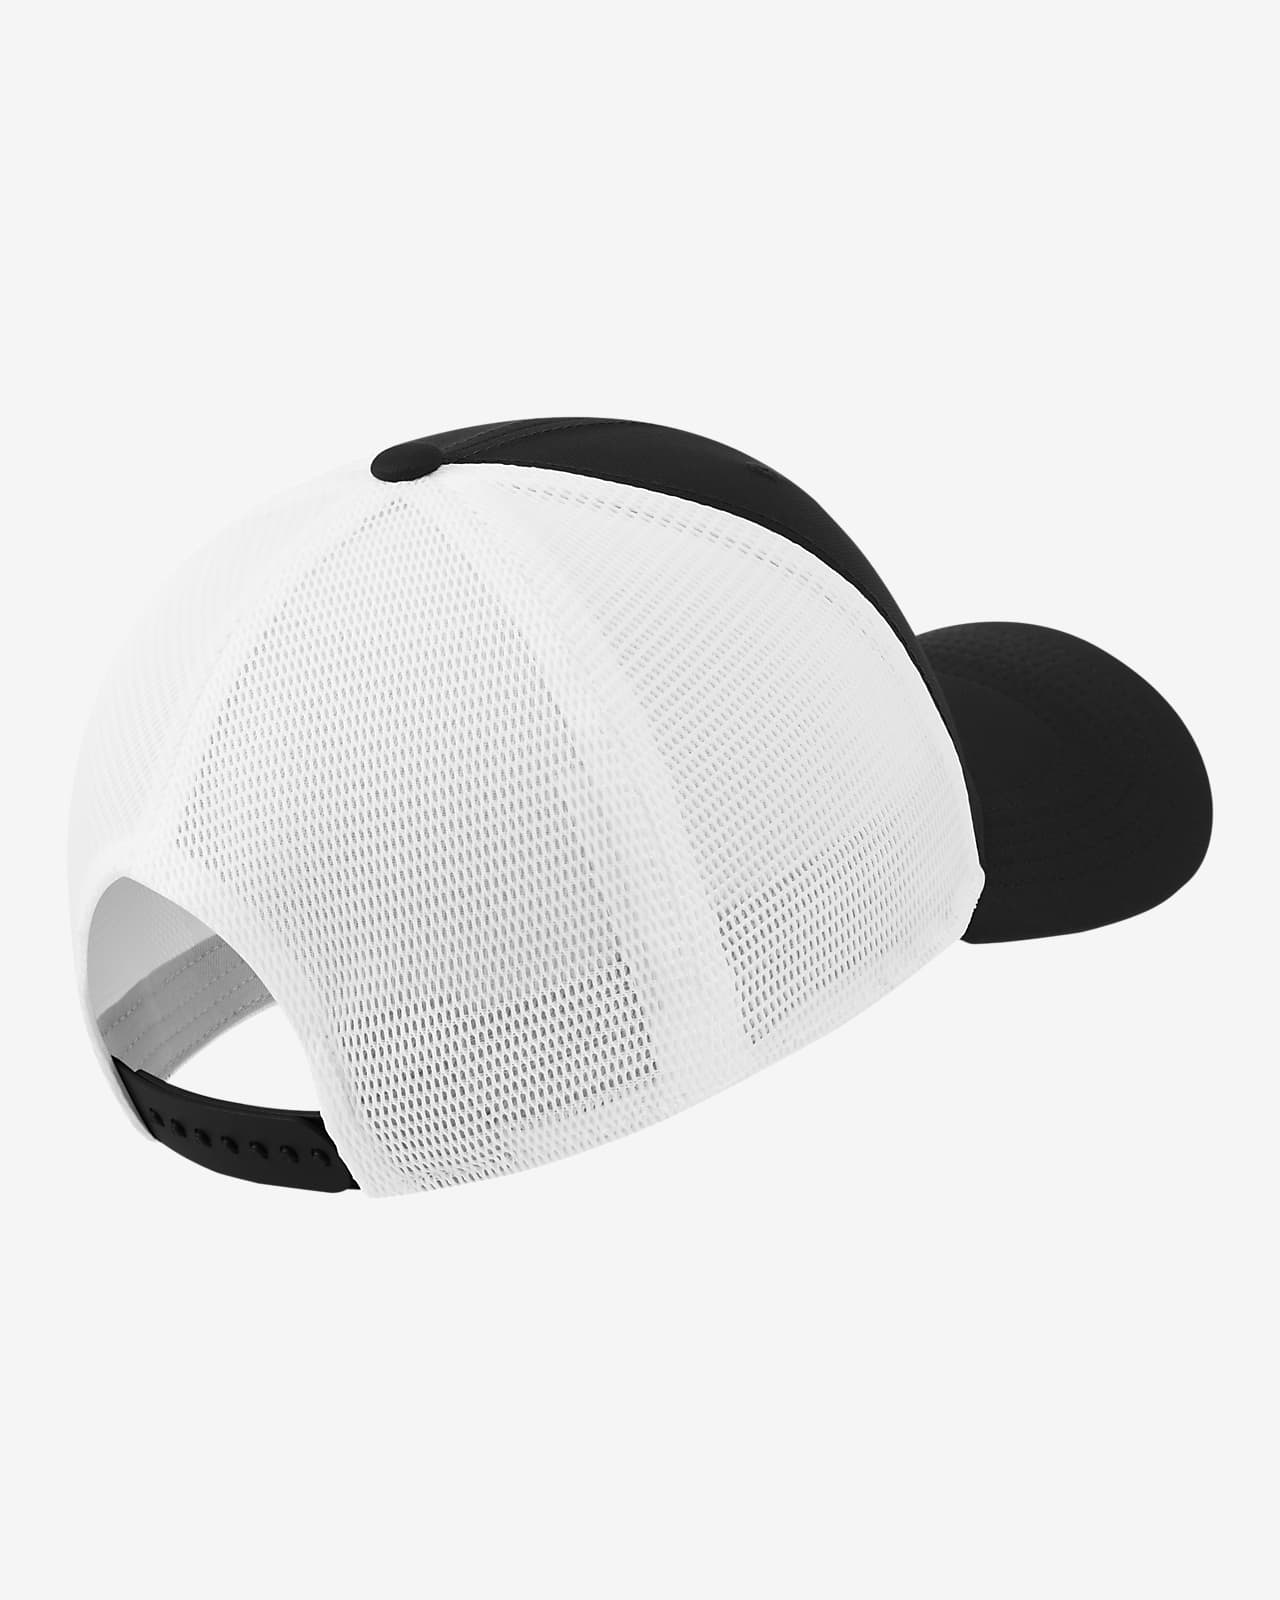 Nike Classic 99 Hat Top Sellers, GET 56% OFF,